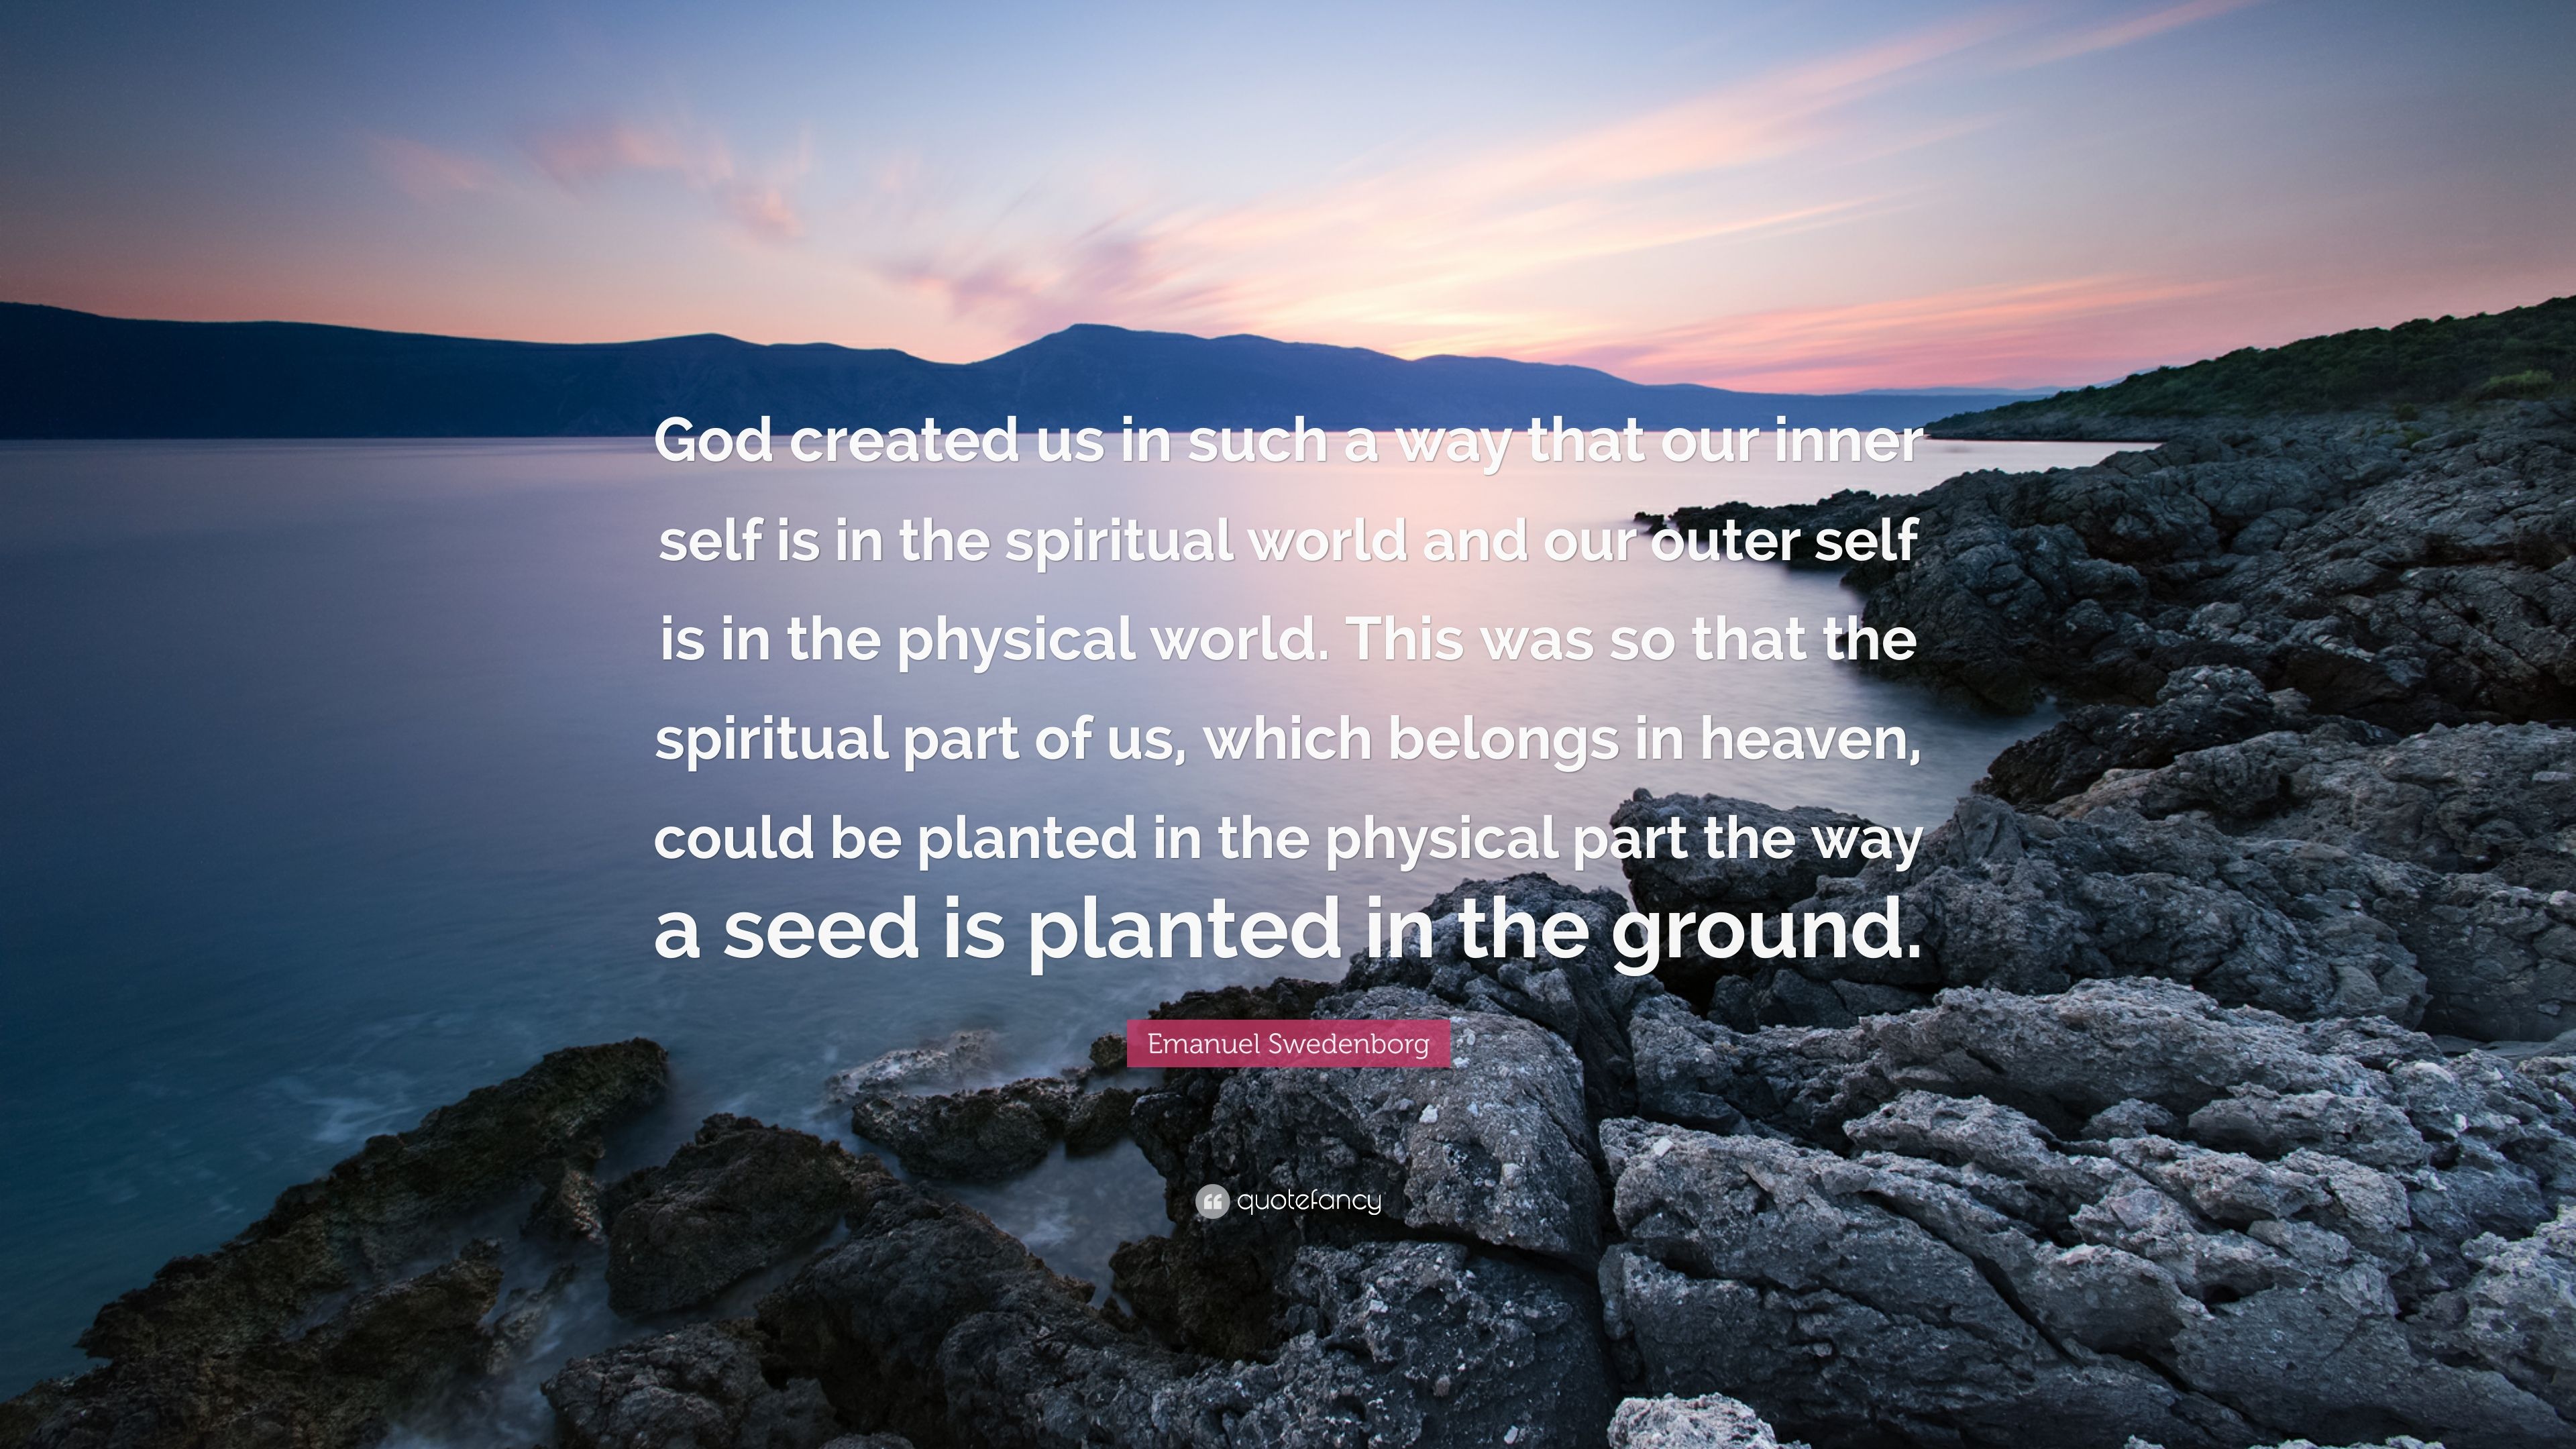 Emanuel Swedenborg Quote: “God created us in such a way that our